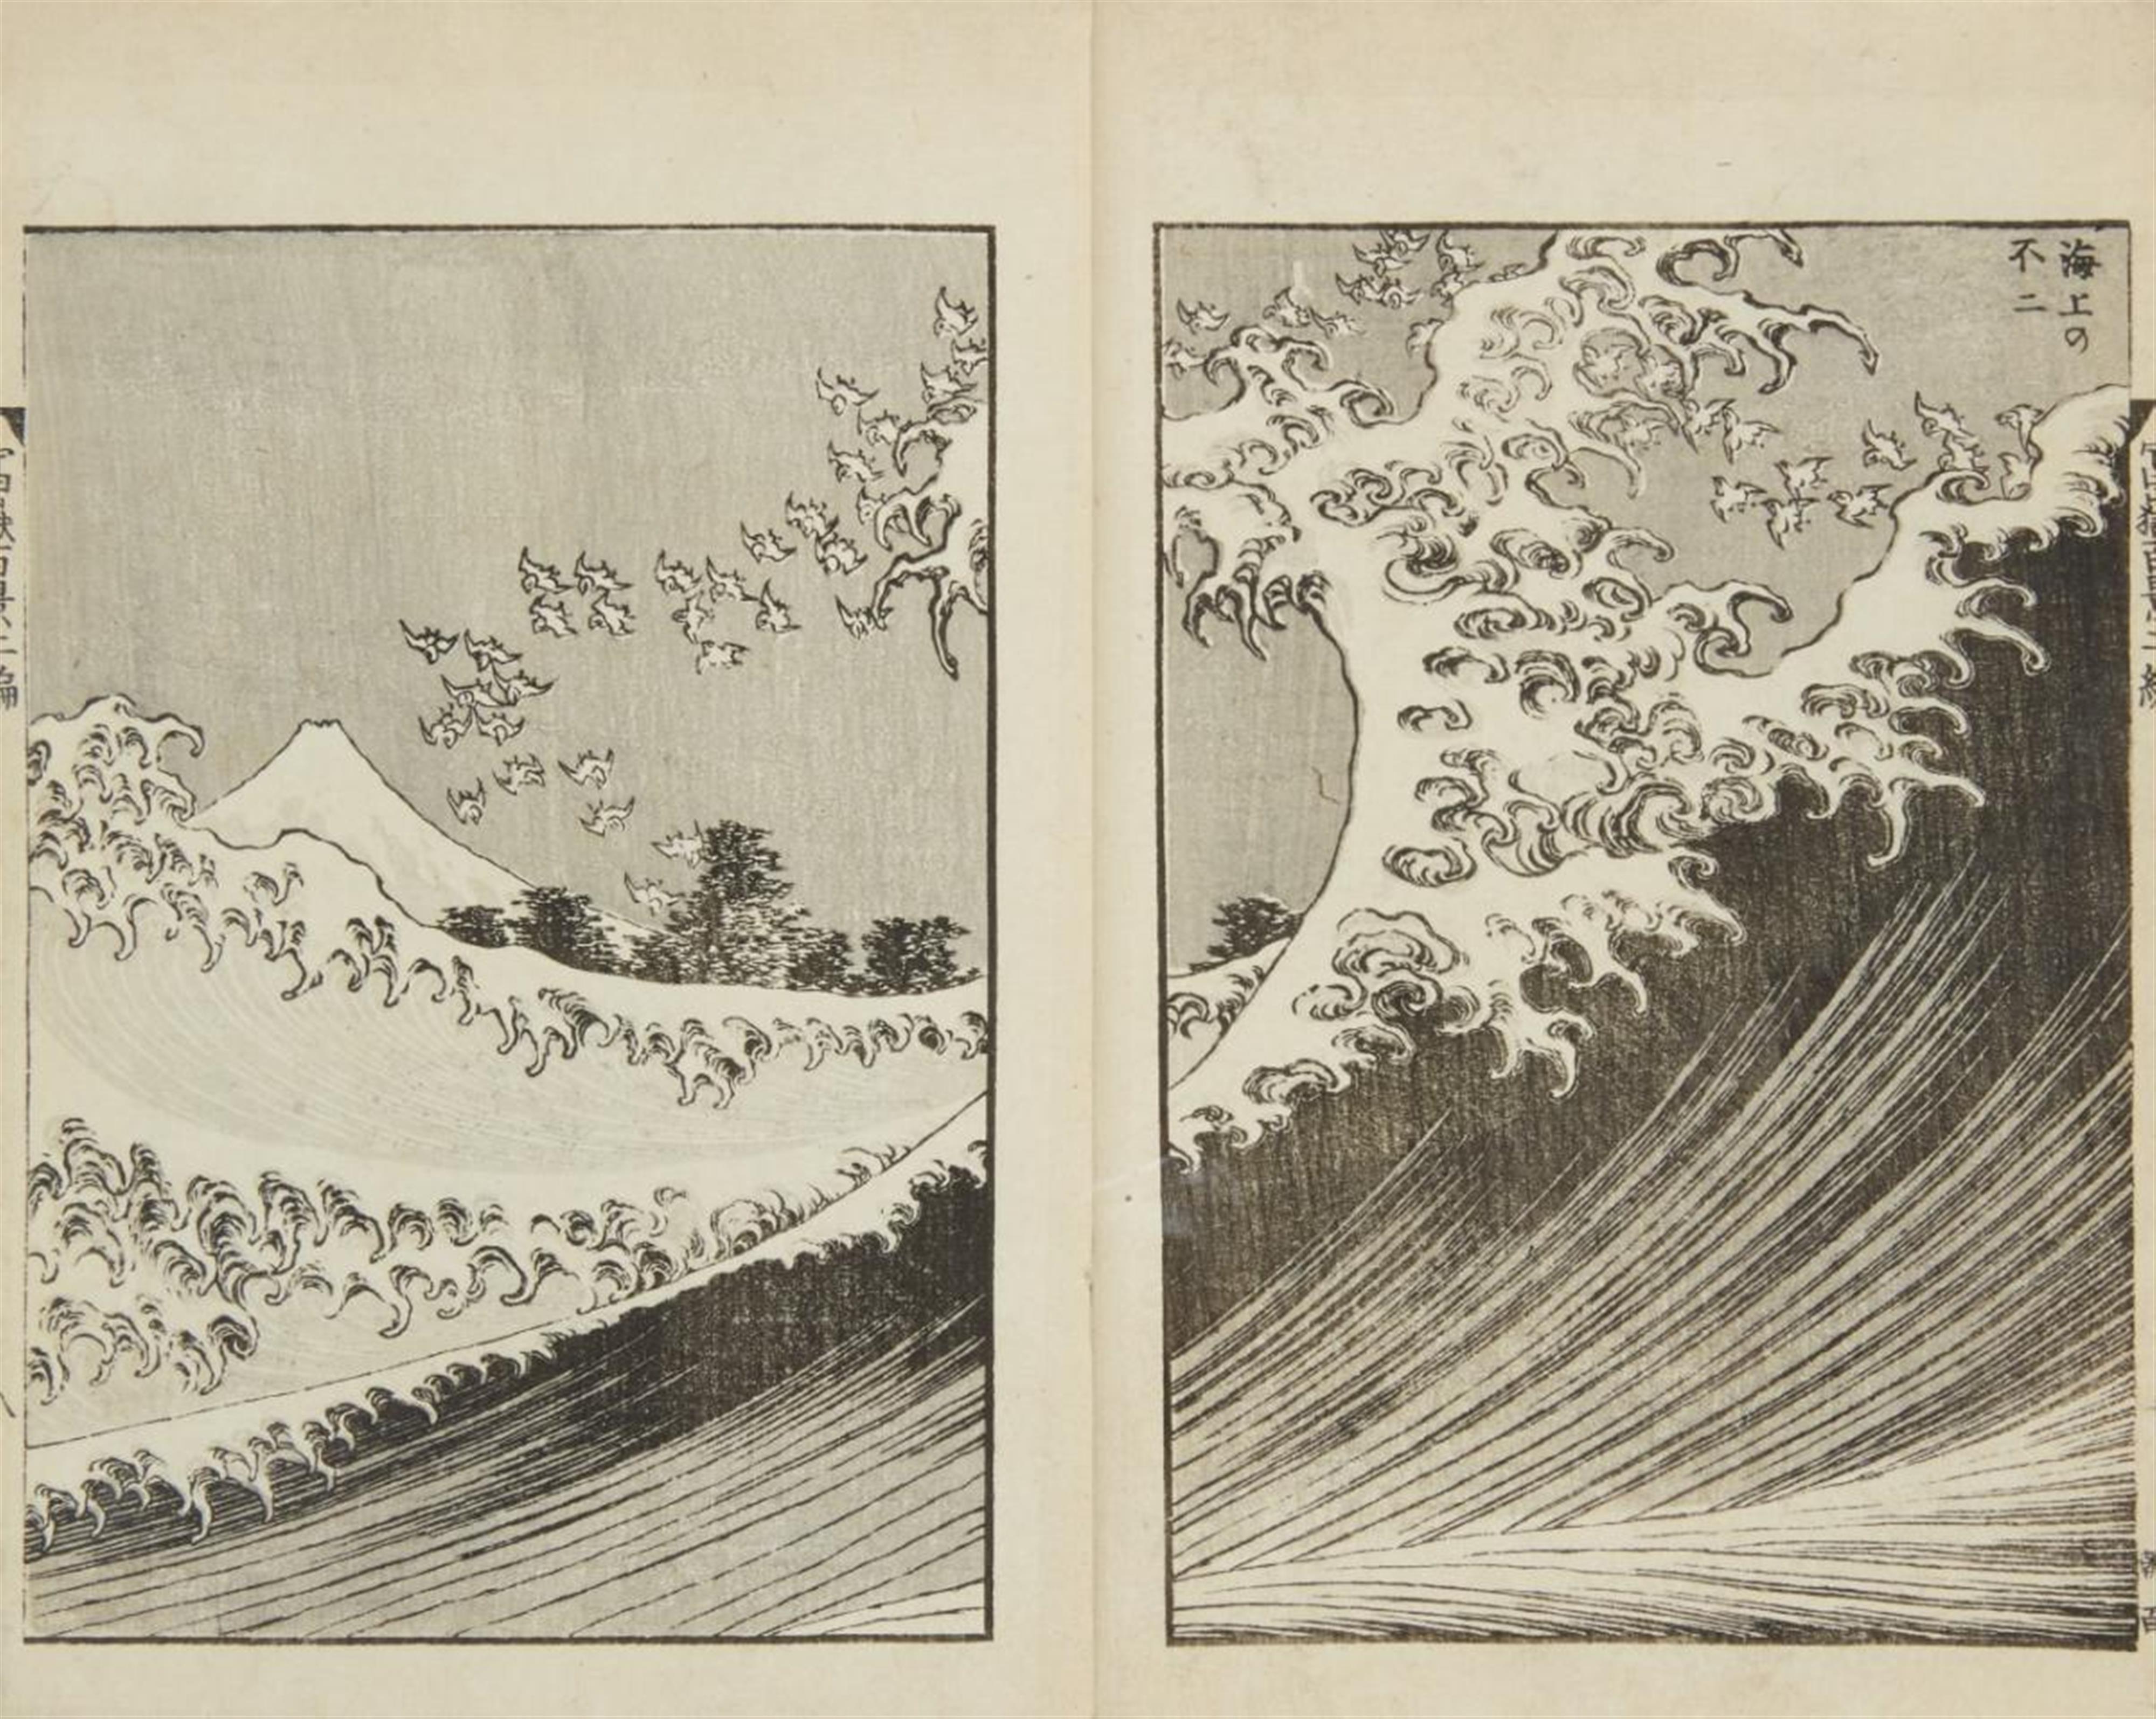 Katsushika Hokusai - 22.7 x 15.6 cm. Fugaku hyakkei, 3 vols. Vol. 1: 1 page advertisement, 2 pages foreword, dated 1834, 12 single and 19 double page b/w illustrations with gray, 1 page colophon. Vo... - image-3